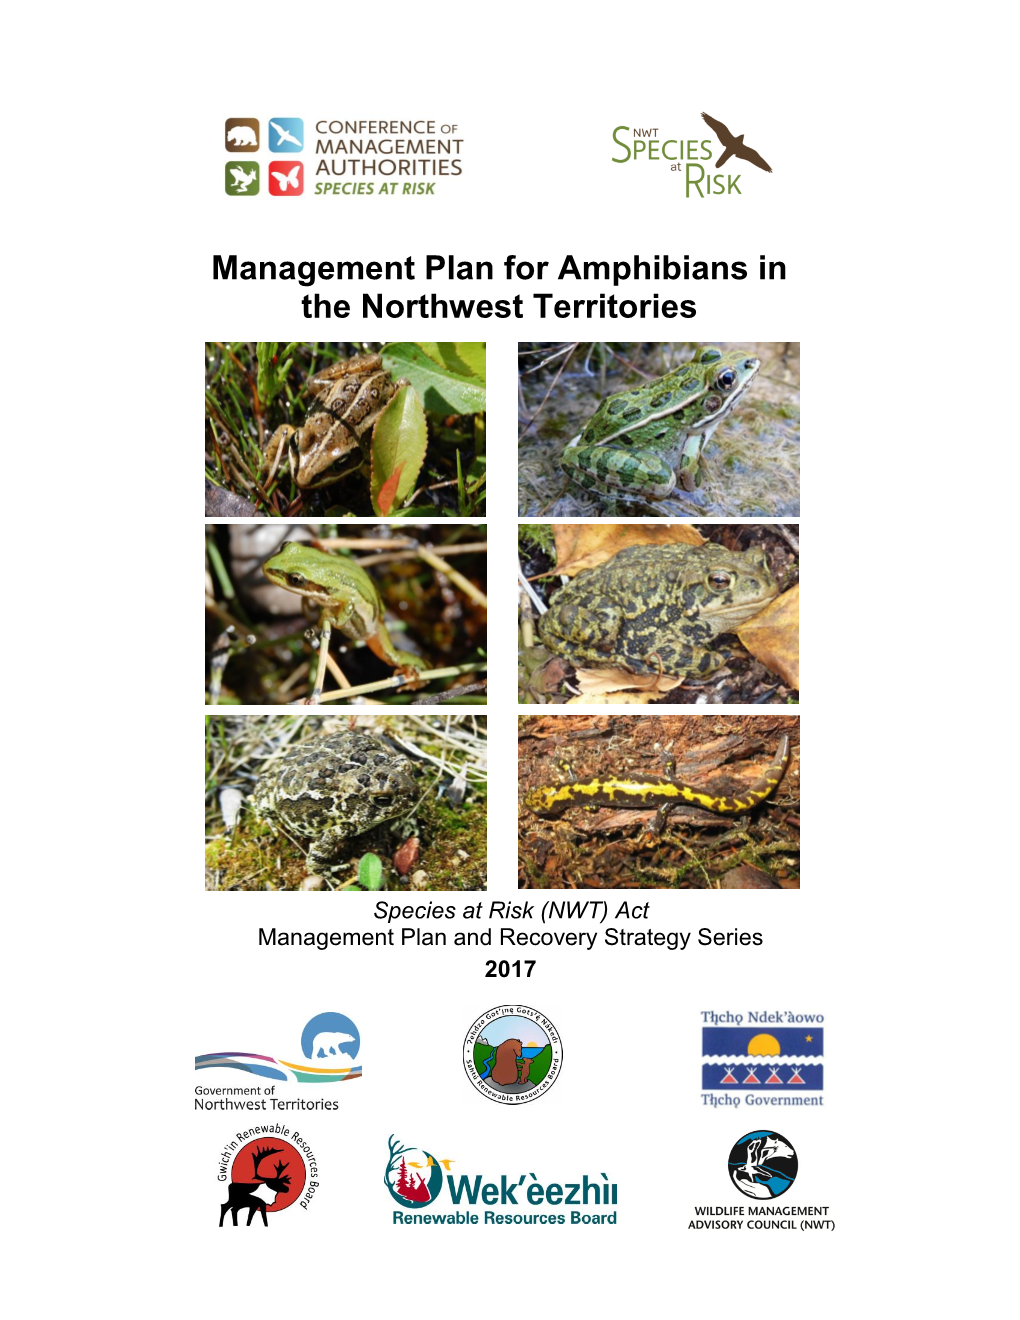 Management Plan for Amphibians in the Northwest Territories